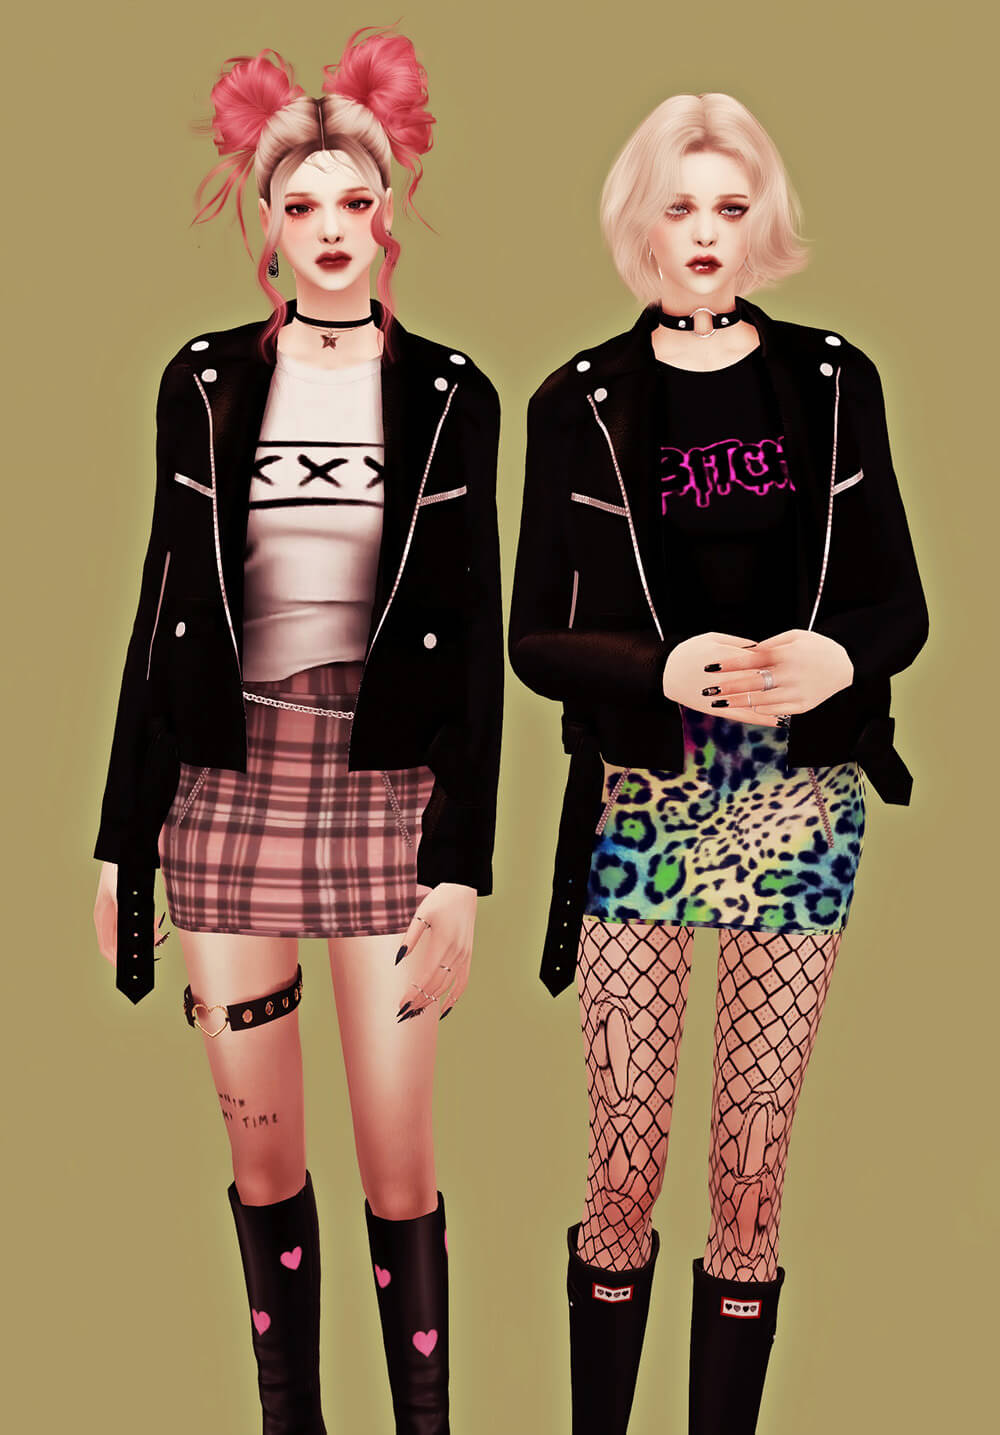 The Sims 4 Custom Content - The Sims 4 Quilted Leather Skirt